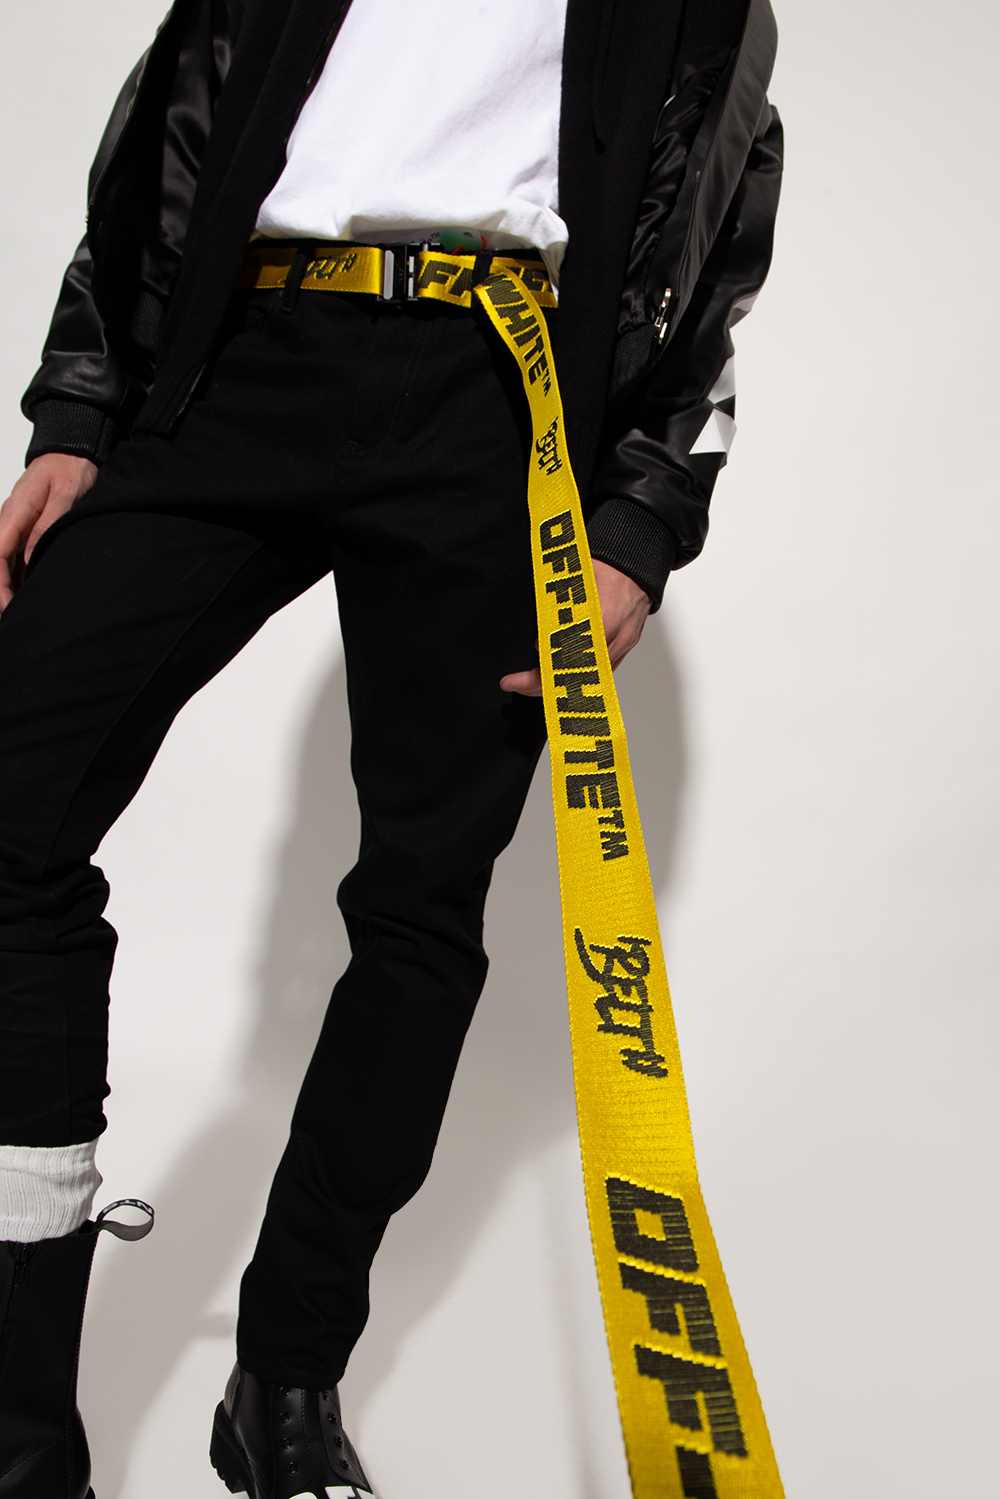 OFF-WHITE: nylon belt with inlaid logo - Yellow  Off-White belt  OBRB001F23FAB00 online at